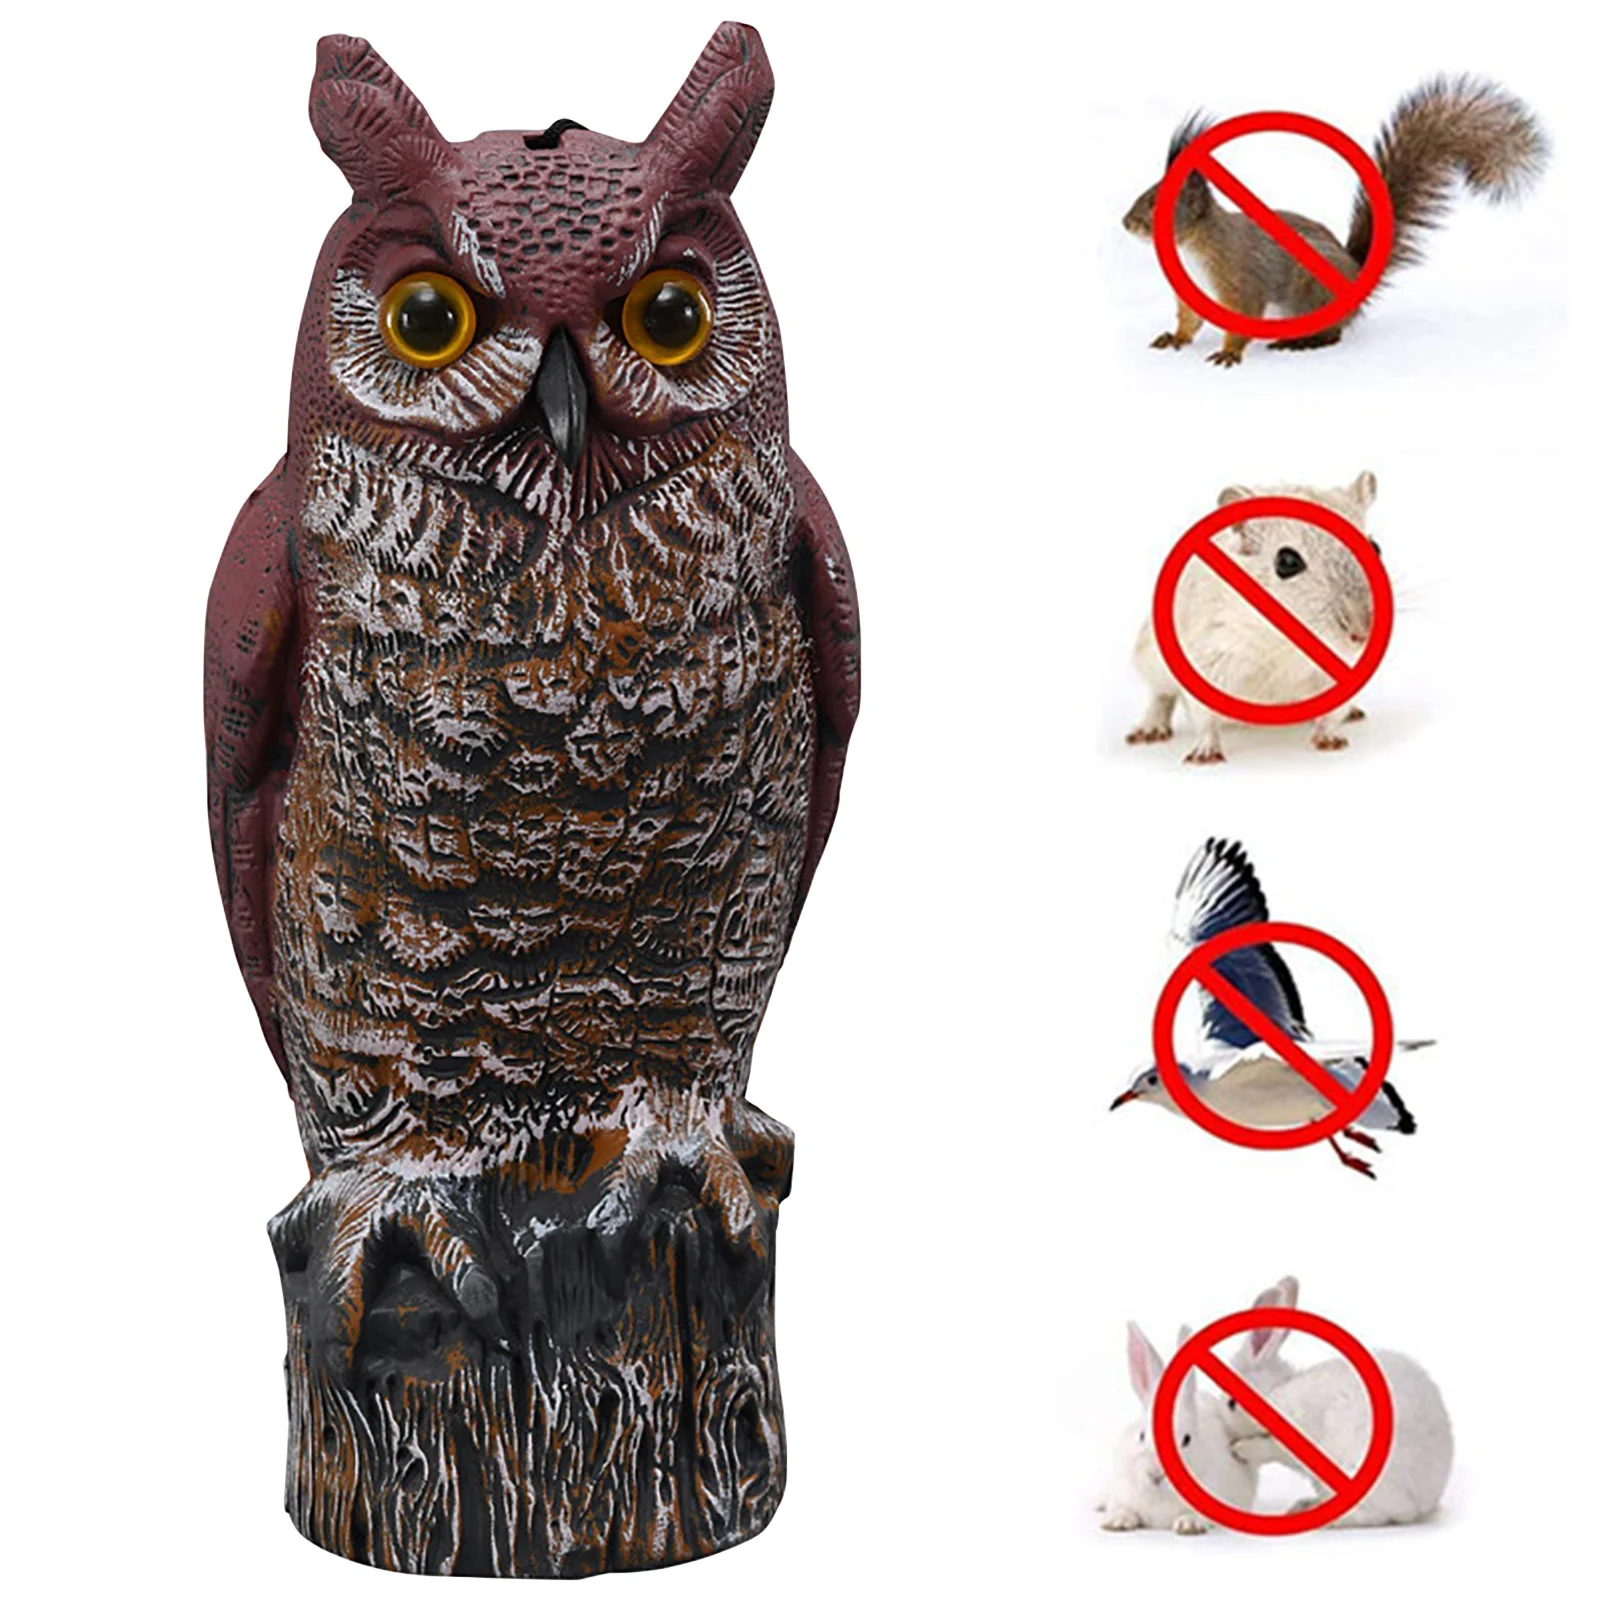 

Outdoor Realistic Fake Owl Decoy Bird Repellent Pest Control With Flashing Eyes Frightening Sounds Garden Protector Decoration